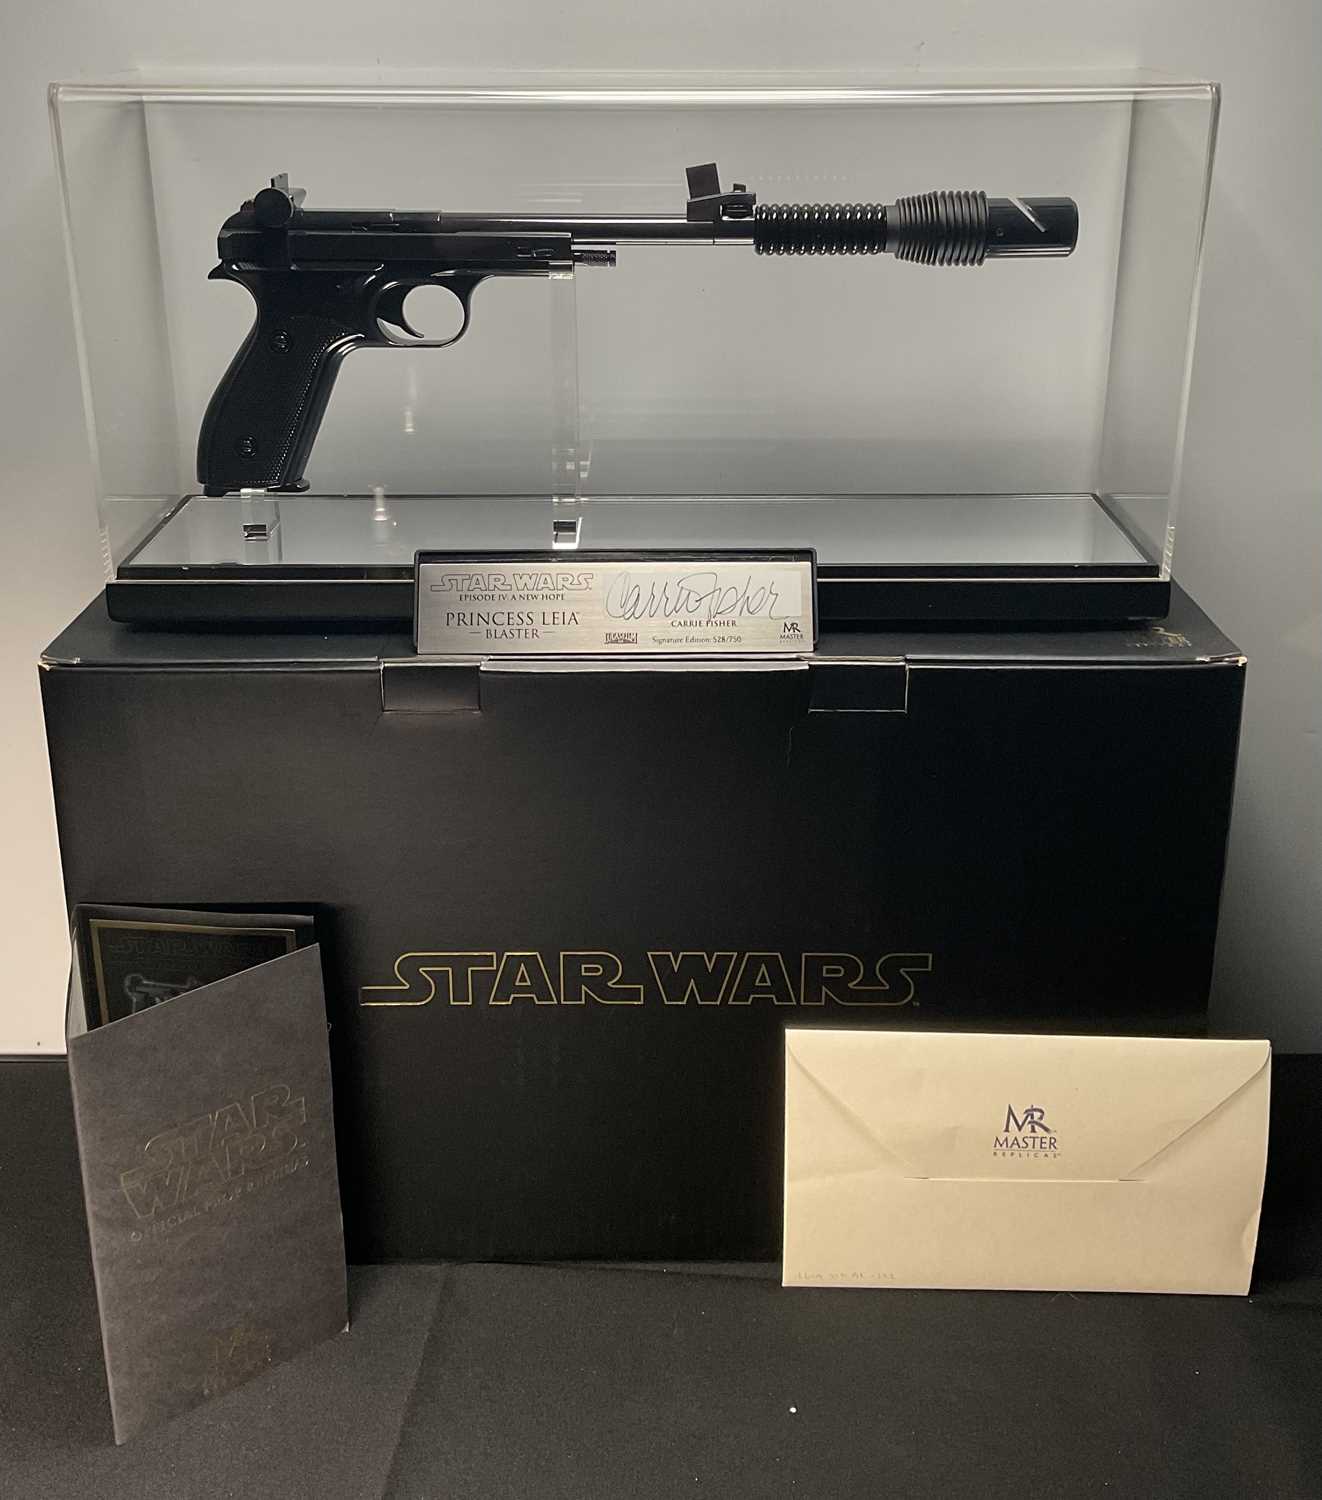 STAR WARS - A Master Replicas Star Wars A New Hope Princess Leia Signature Series Blaster, in